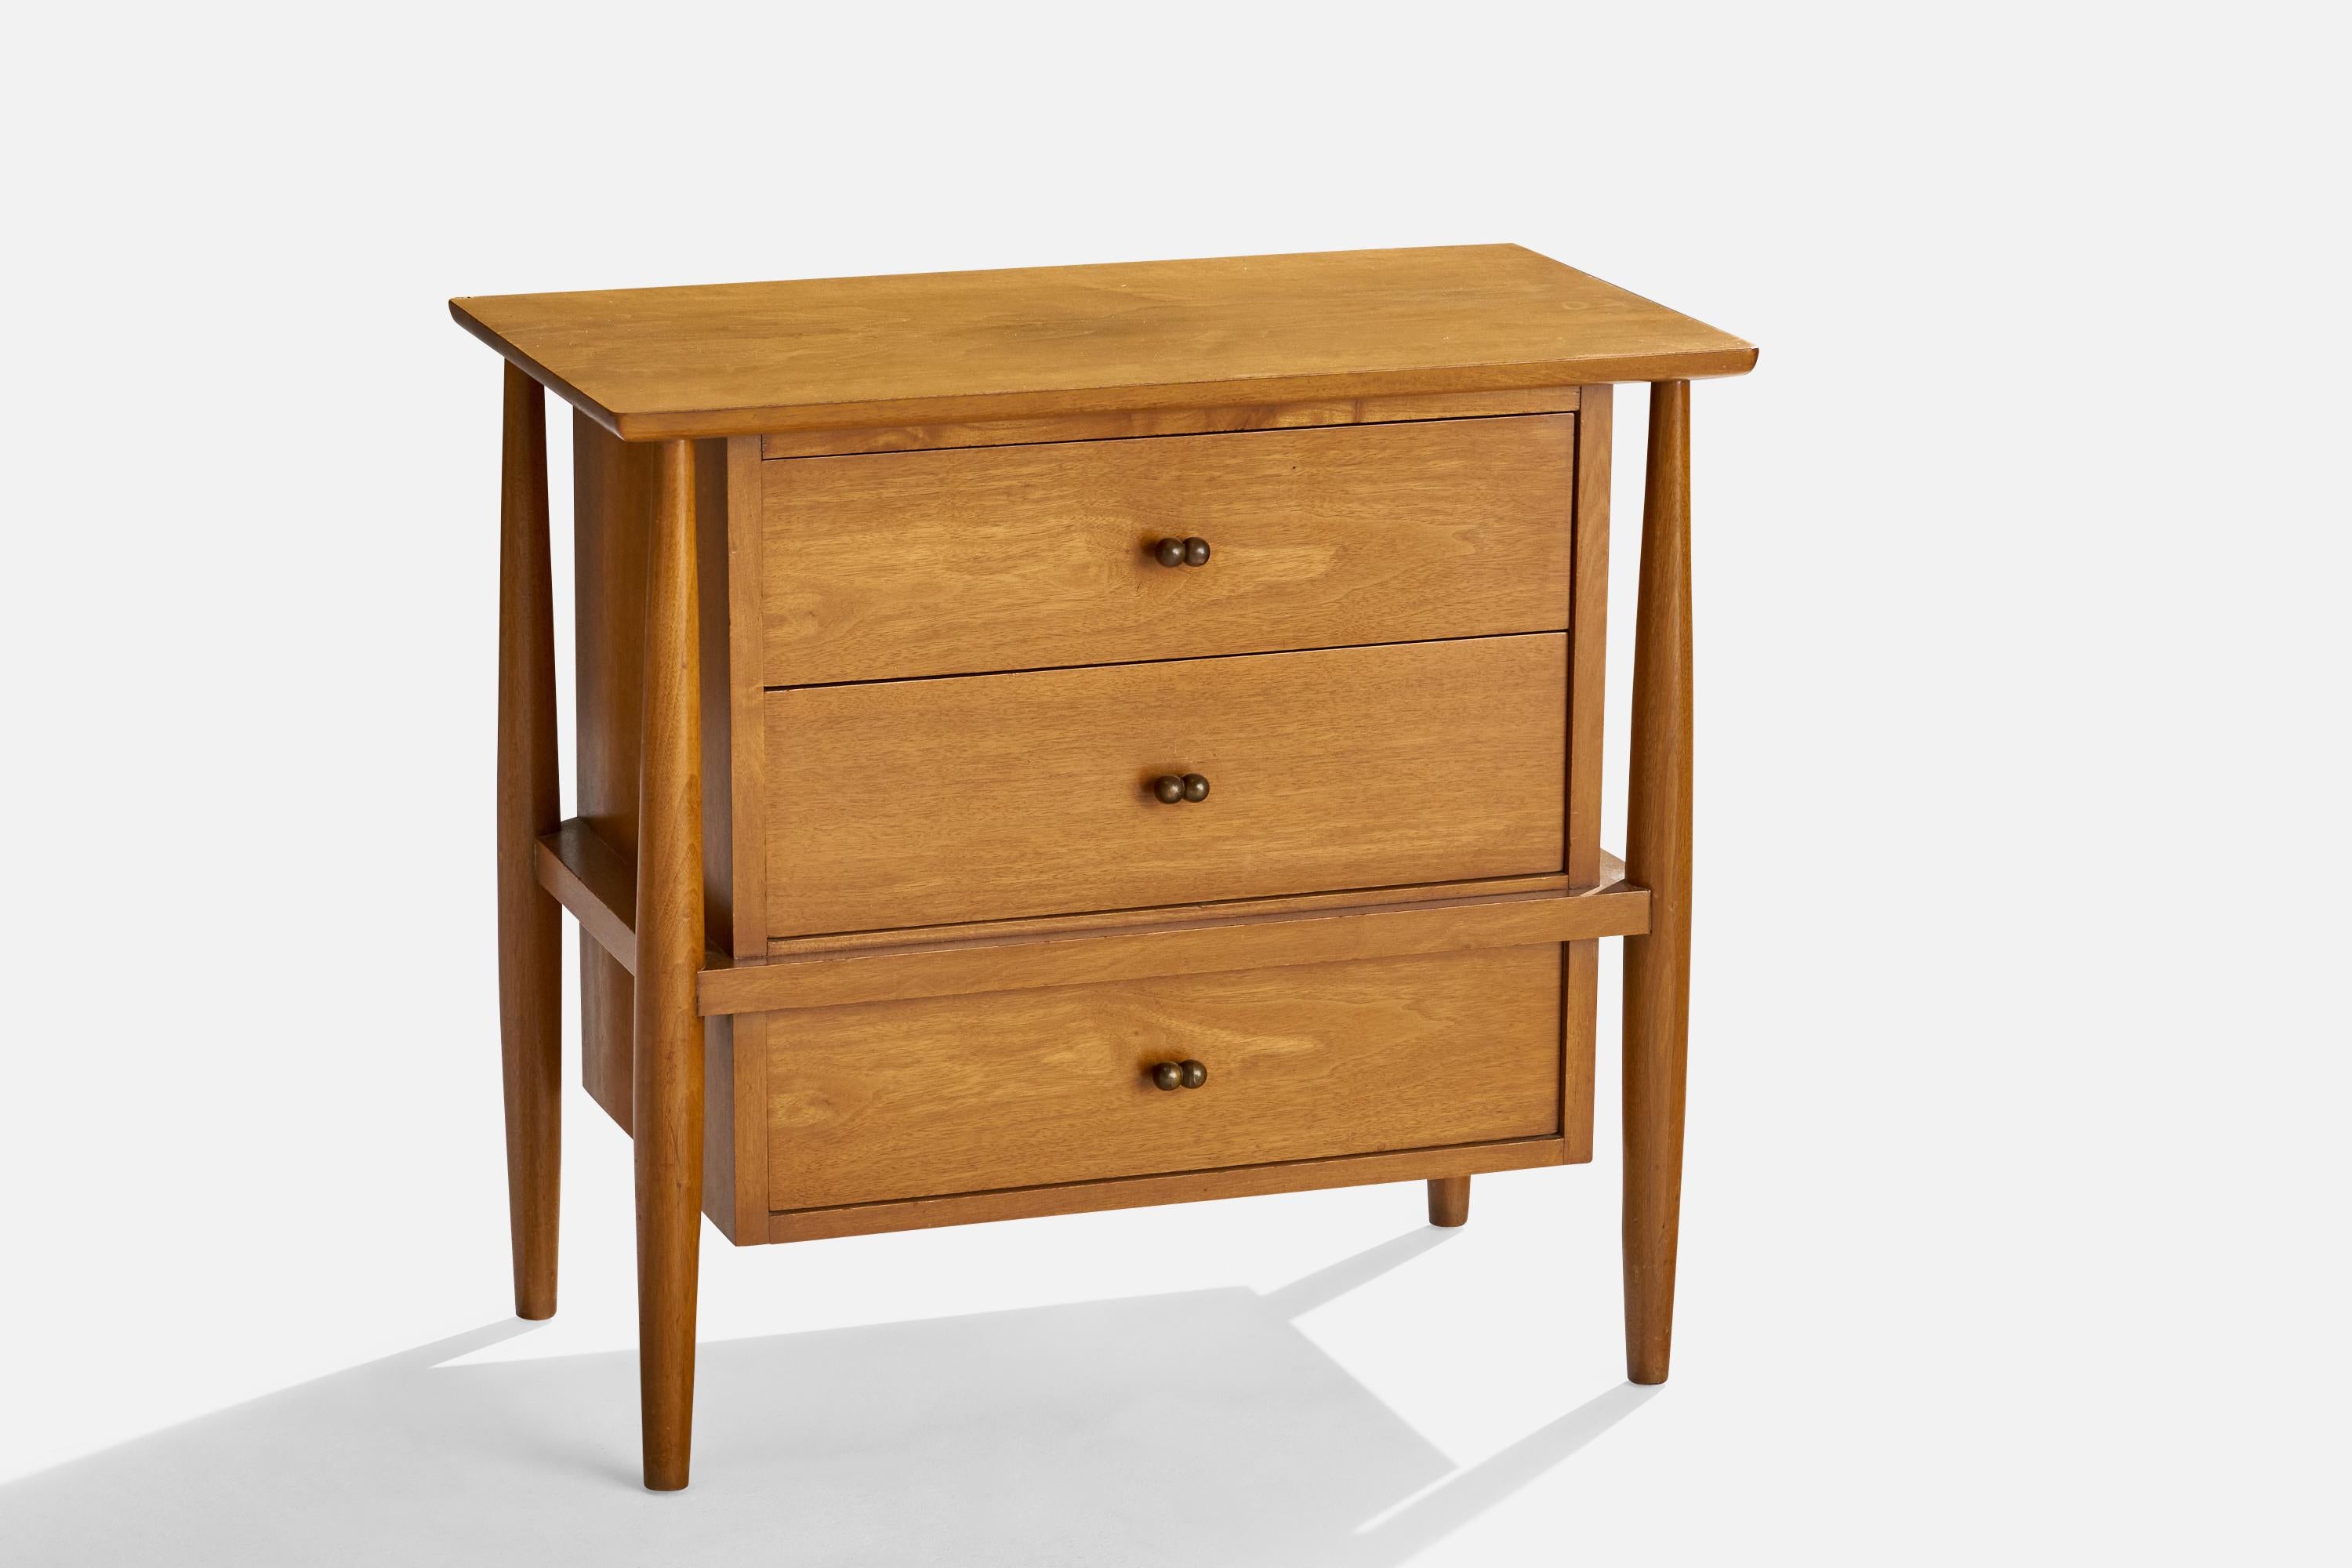 Mid-20th Century Mount Airy, Nightstands, Walnut, Brass, USA, 1950s For Sale